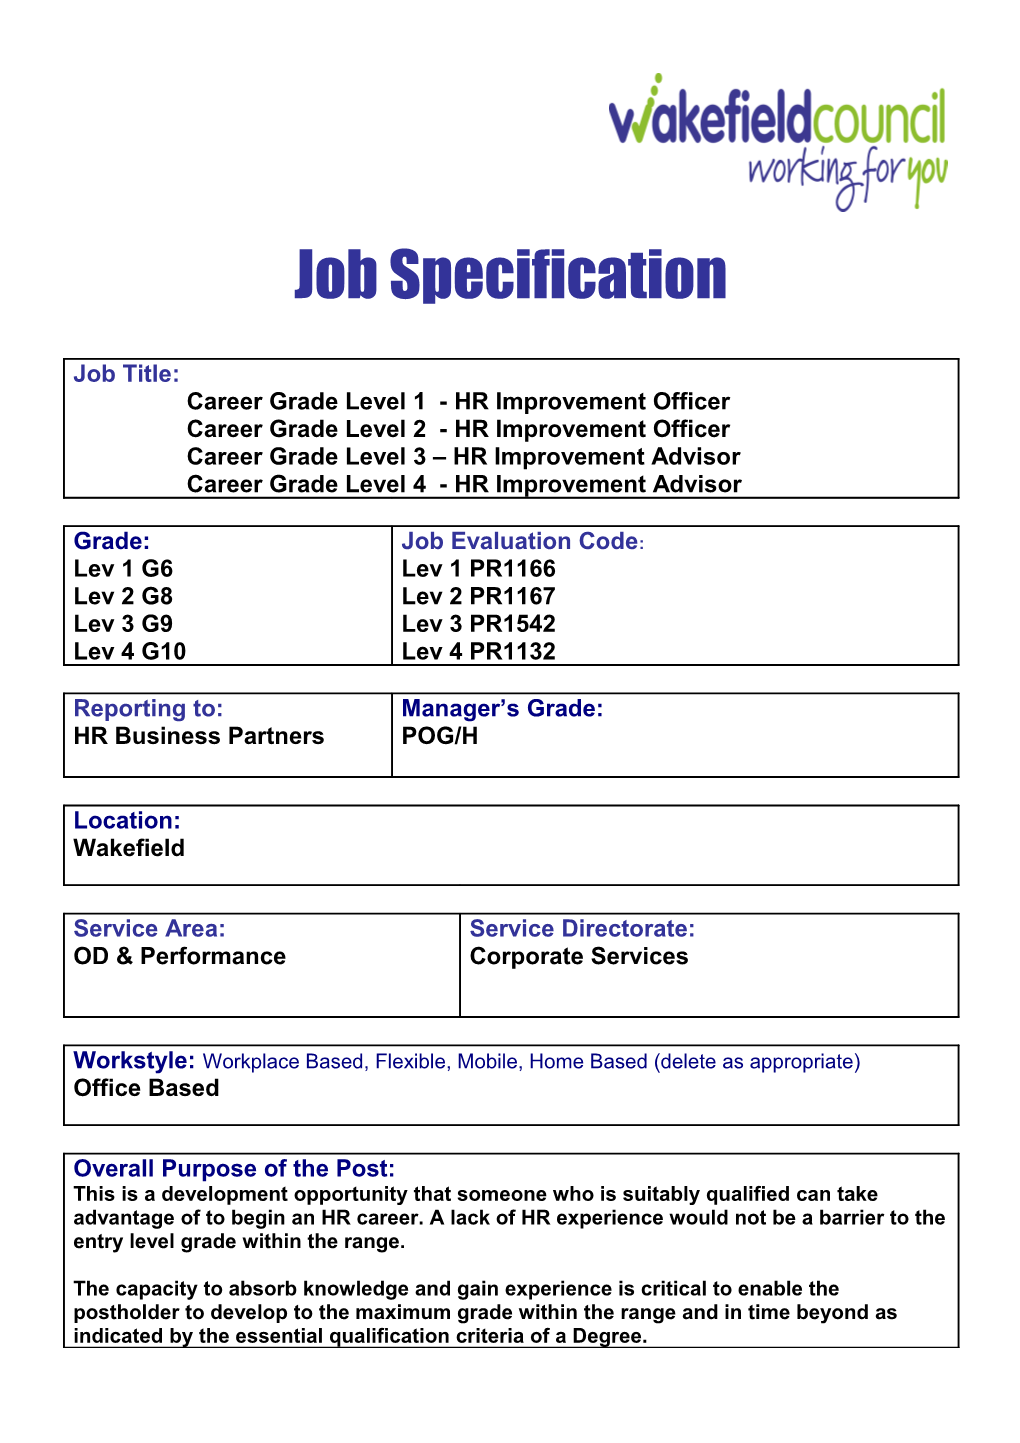 Career Grade Job Specification Form with Guidance